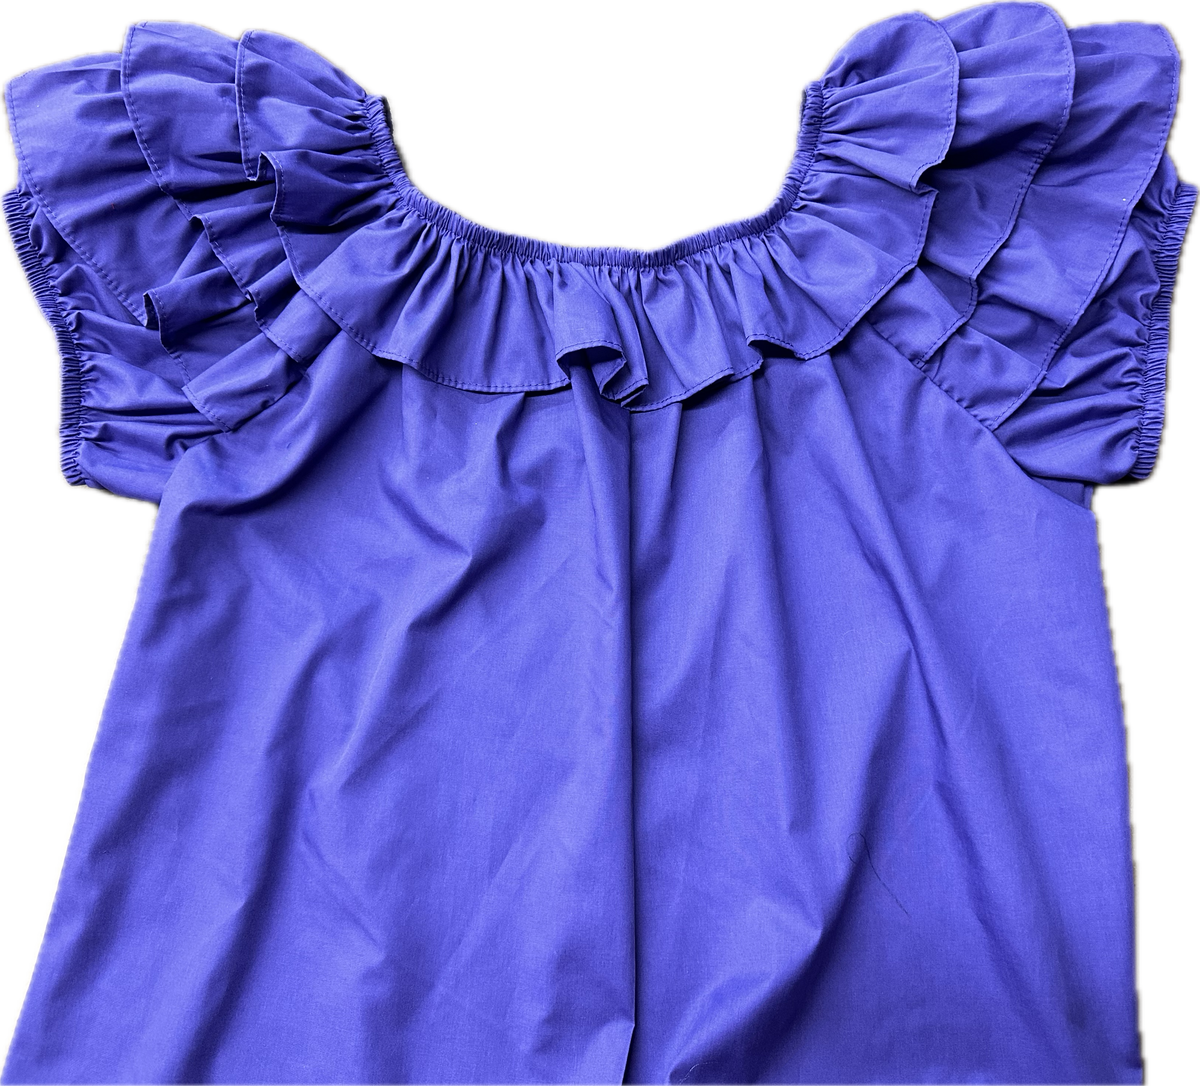 A Triple Ruffle Blouse by Square Up Fashions with ruffles on the shoulders. Easy returns.